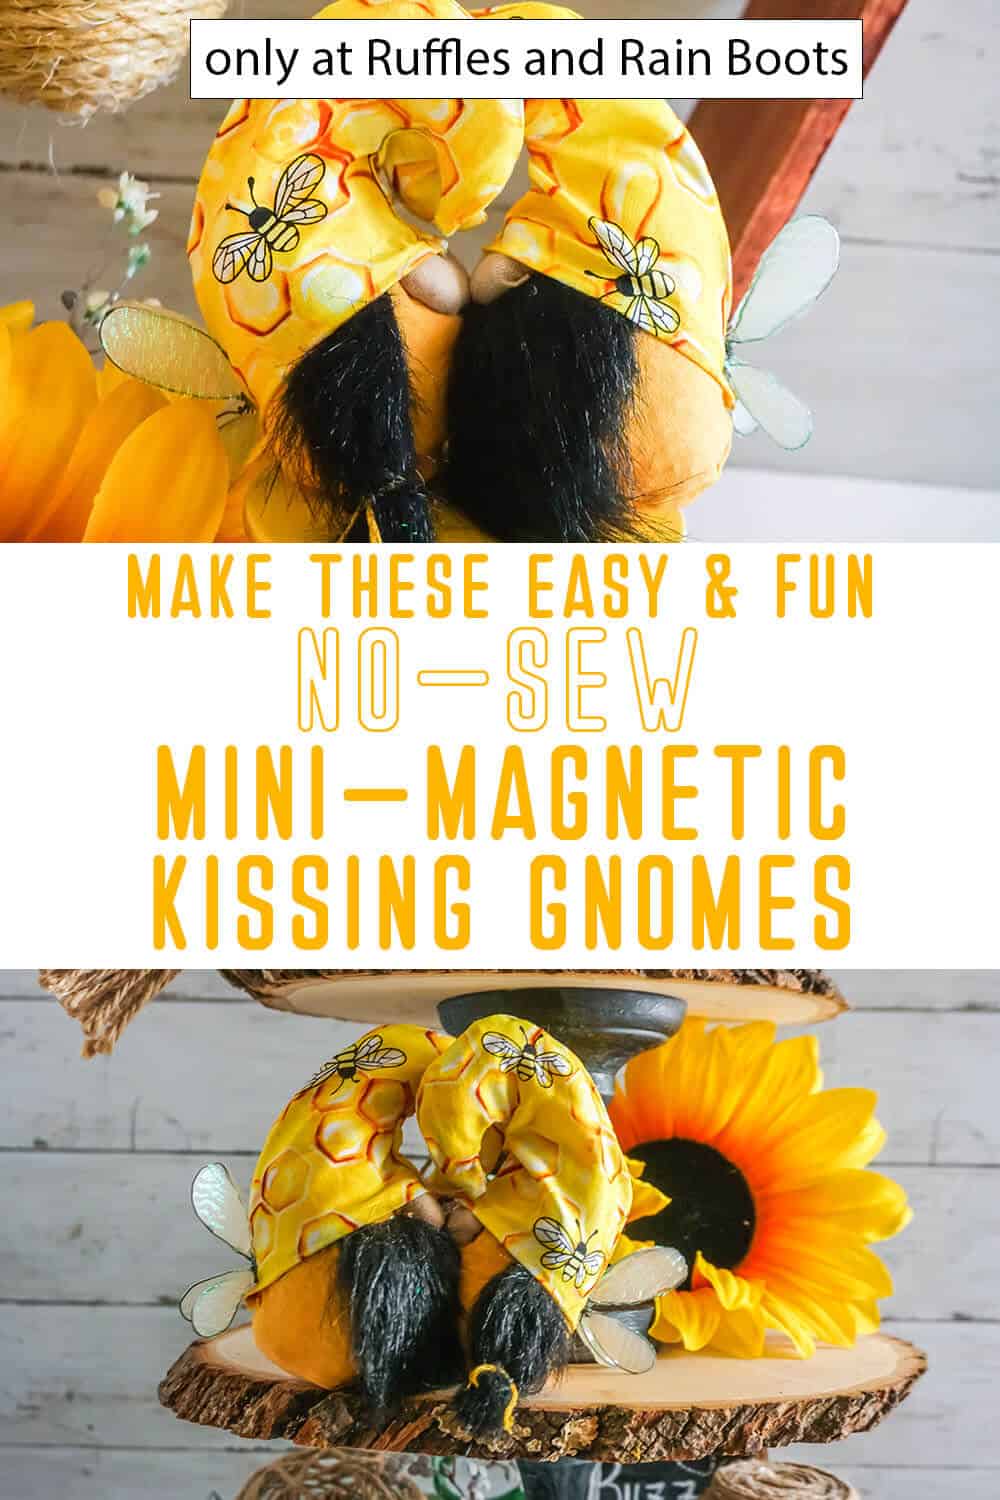 photo collage of mini magnetic kissing bee gnomes with text which reads make these easy & fun no-sew mini-magnetic kissing gnomes